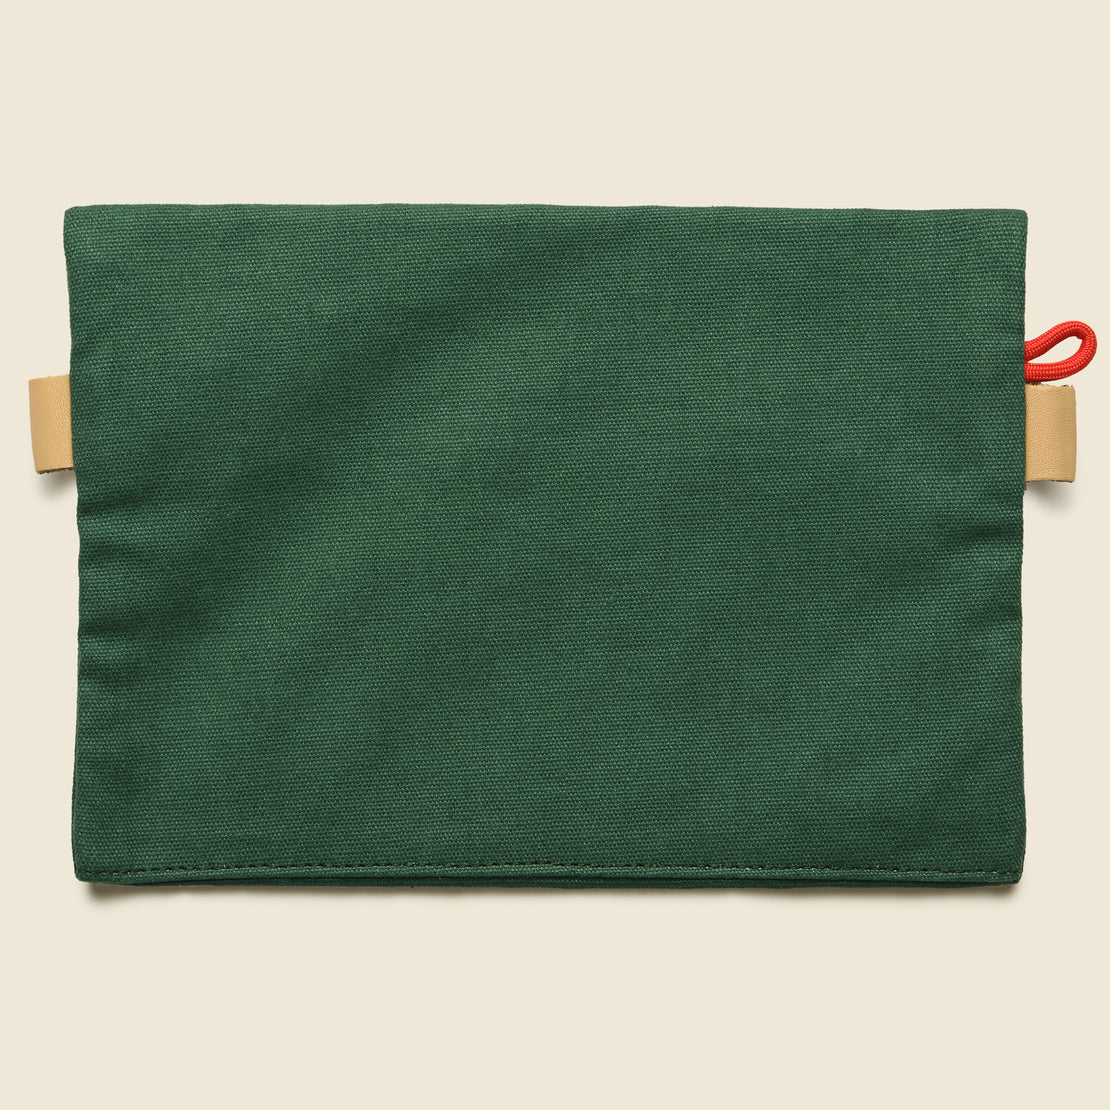 Medium Accessory Bag - Forest Canvas - Topo Designs - STAG Provisions - Accessories - Bags / Luggage